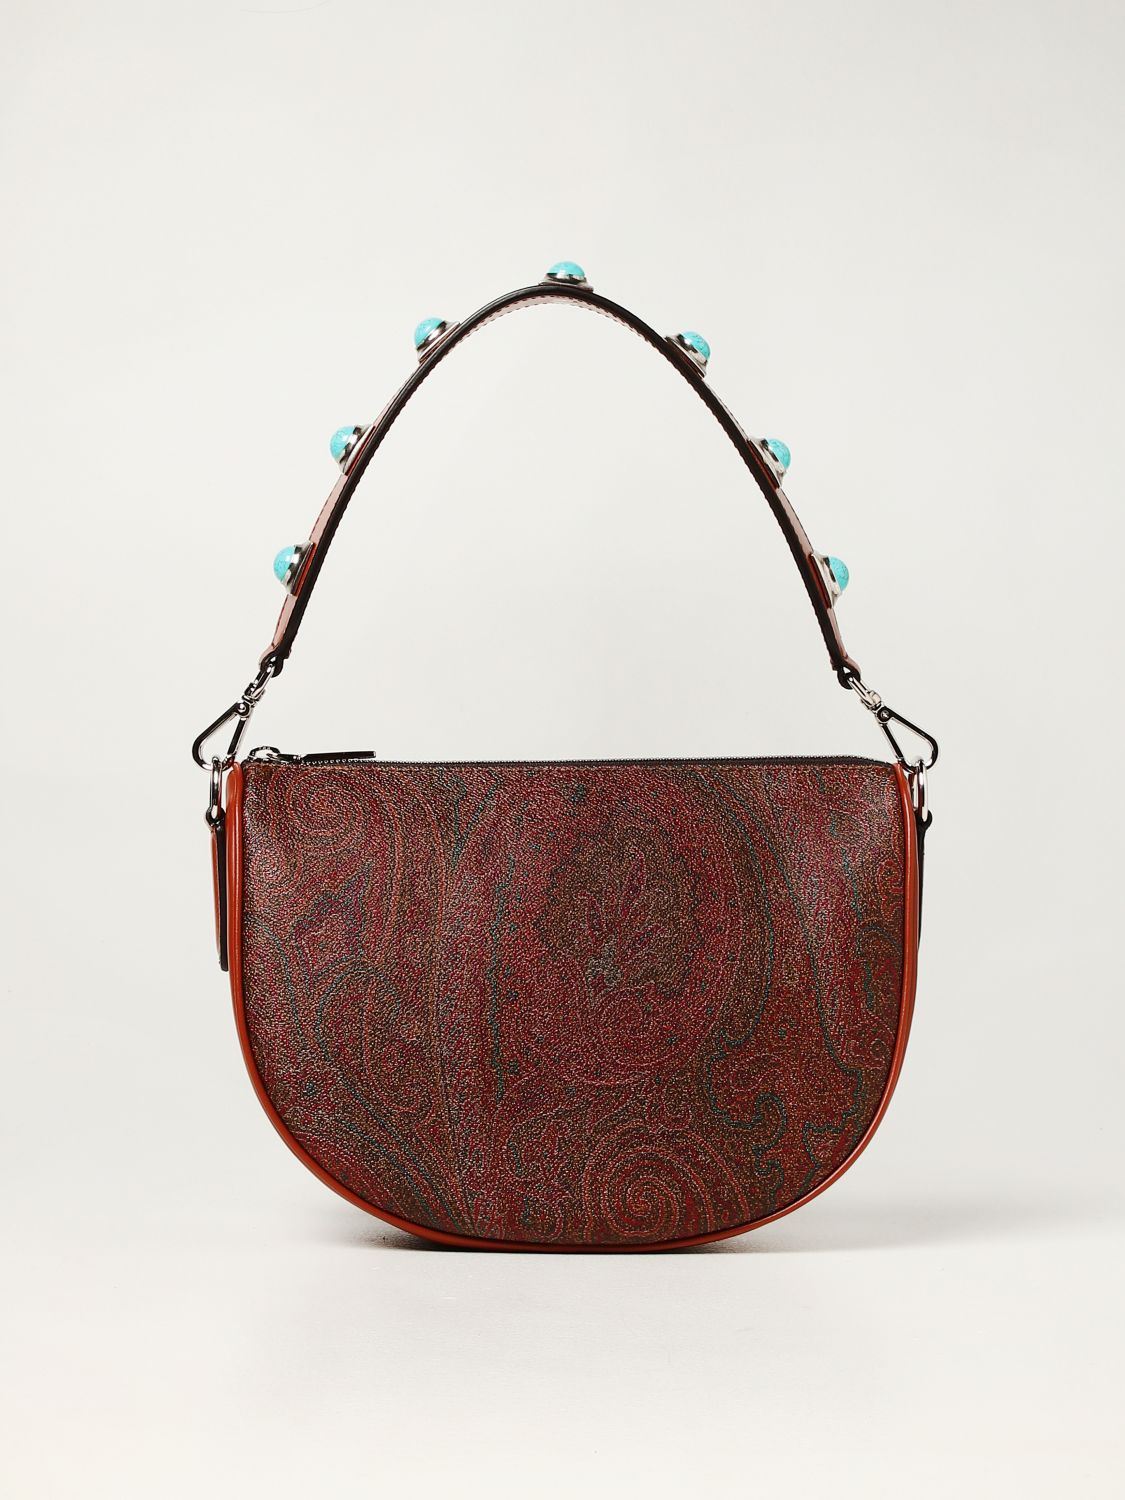 Paisley Shoulder Bag With Multi-Colour Details by Etro at ORCHARD MILE